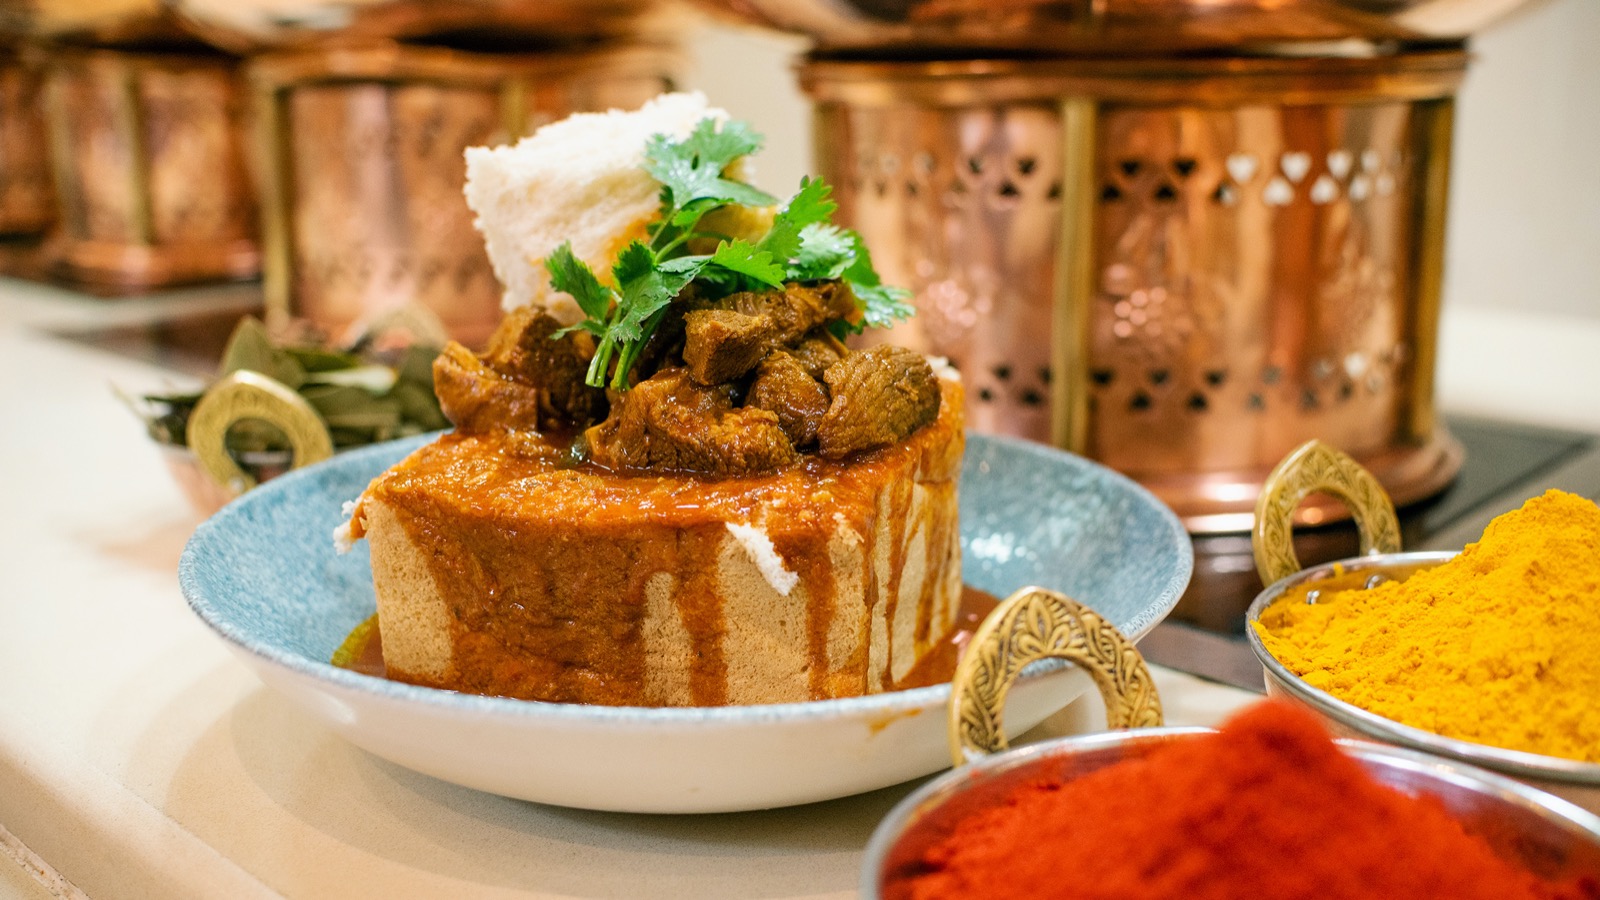 If You'd Try 21 of Street Foods, You're Definitely Adve… Quiz Bunny chow from South Africa